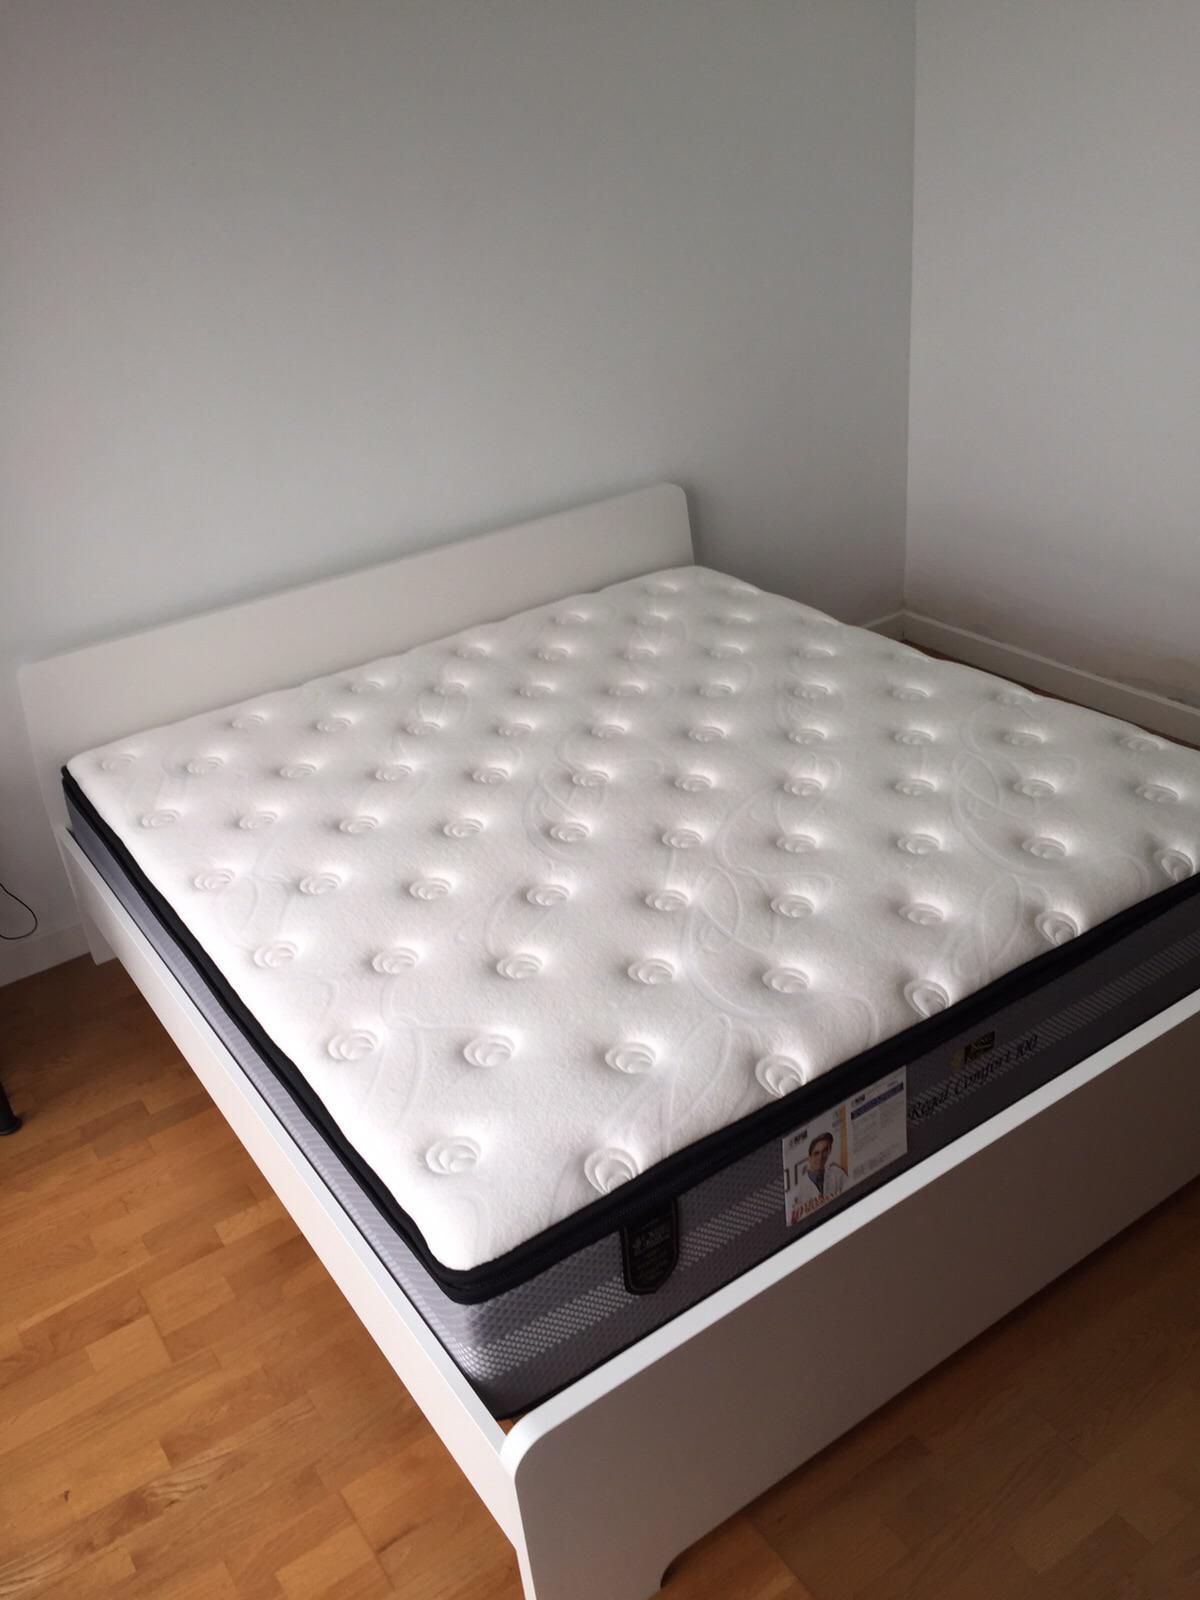 ikea-bed-frame-and-king-koil-matelas-for-sale-0-0-2